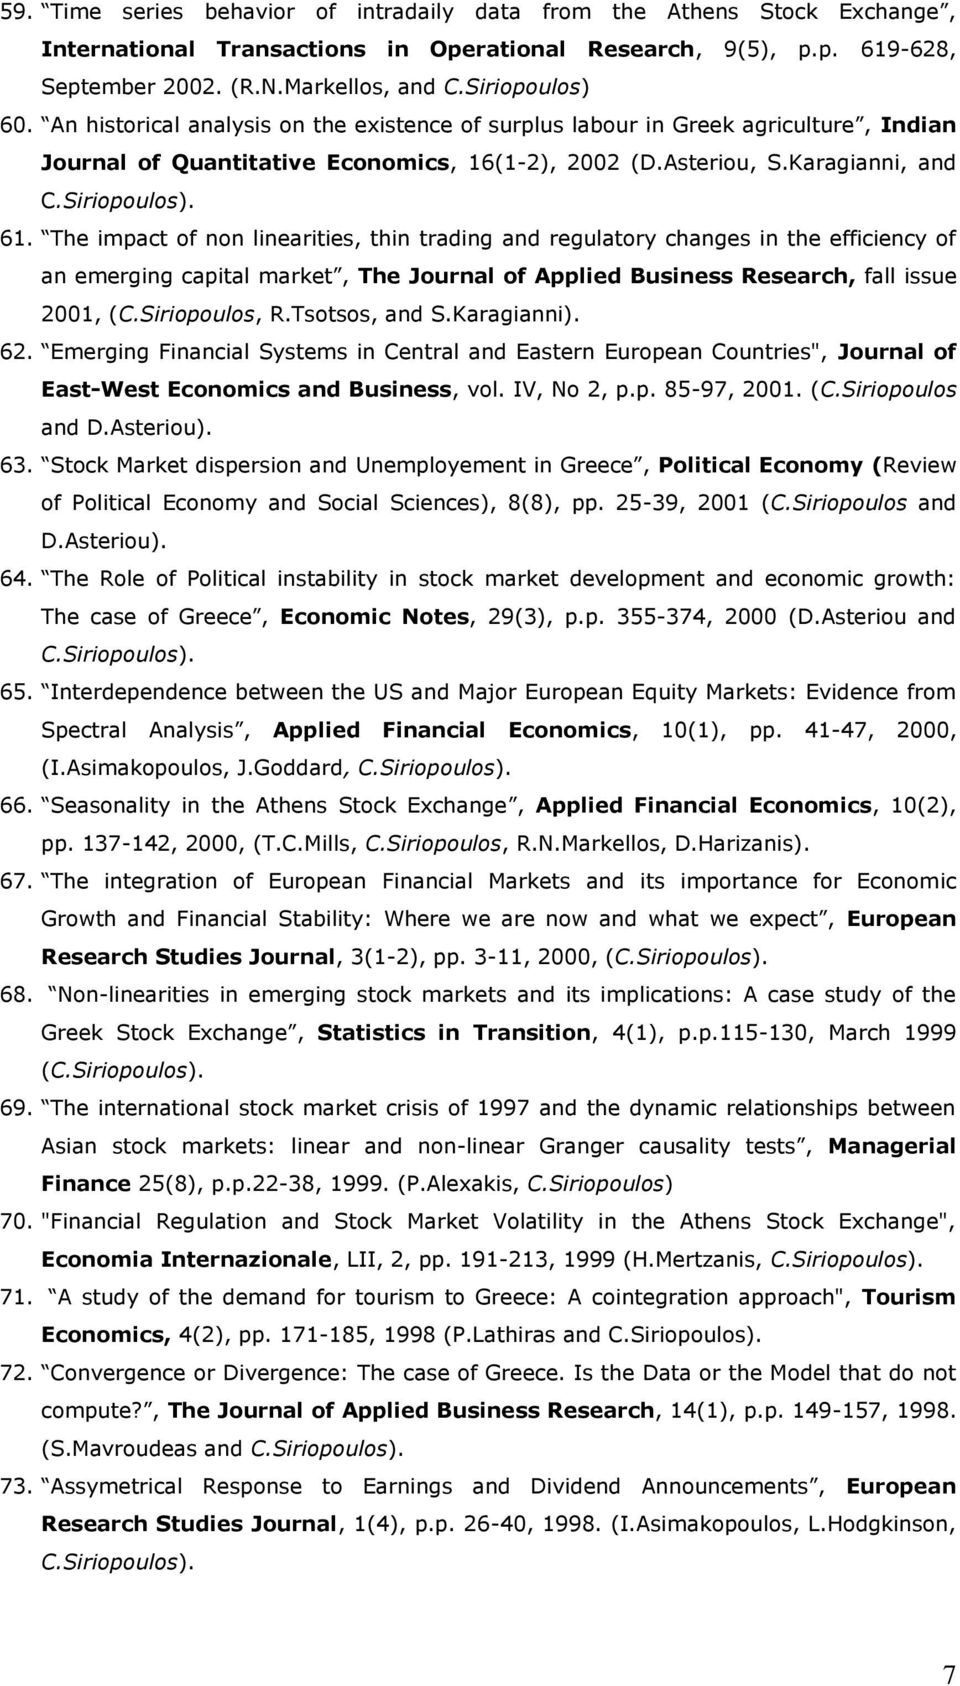 The impact of non linearities, thin trading and regulatory changes in the efficiency of an emerging capital market, The Journal of Applied Business Research, fall issue 2001, (C.Siriopoulos, R.